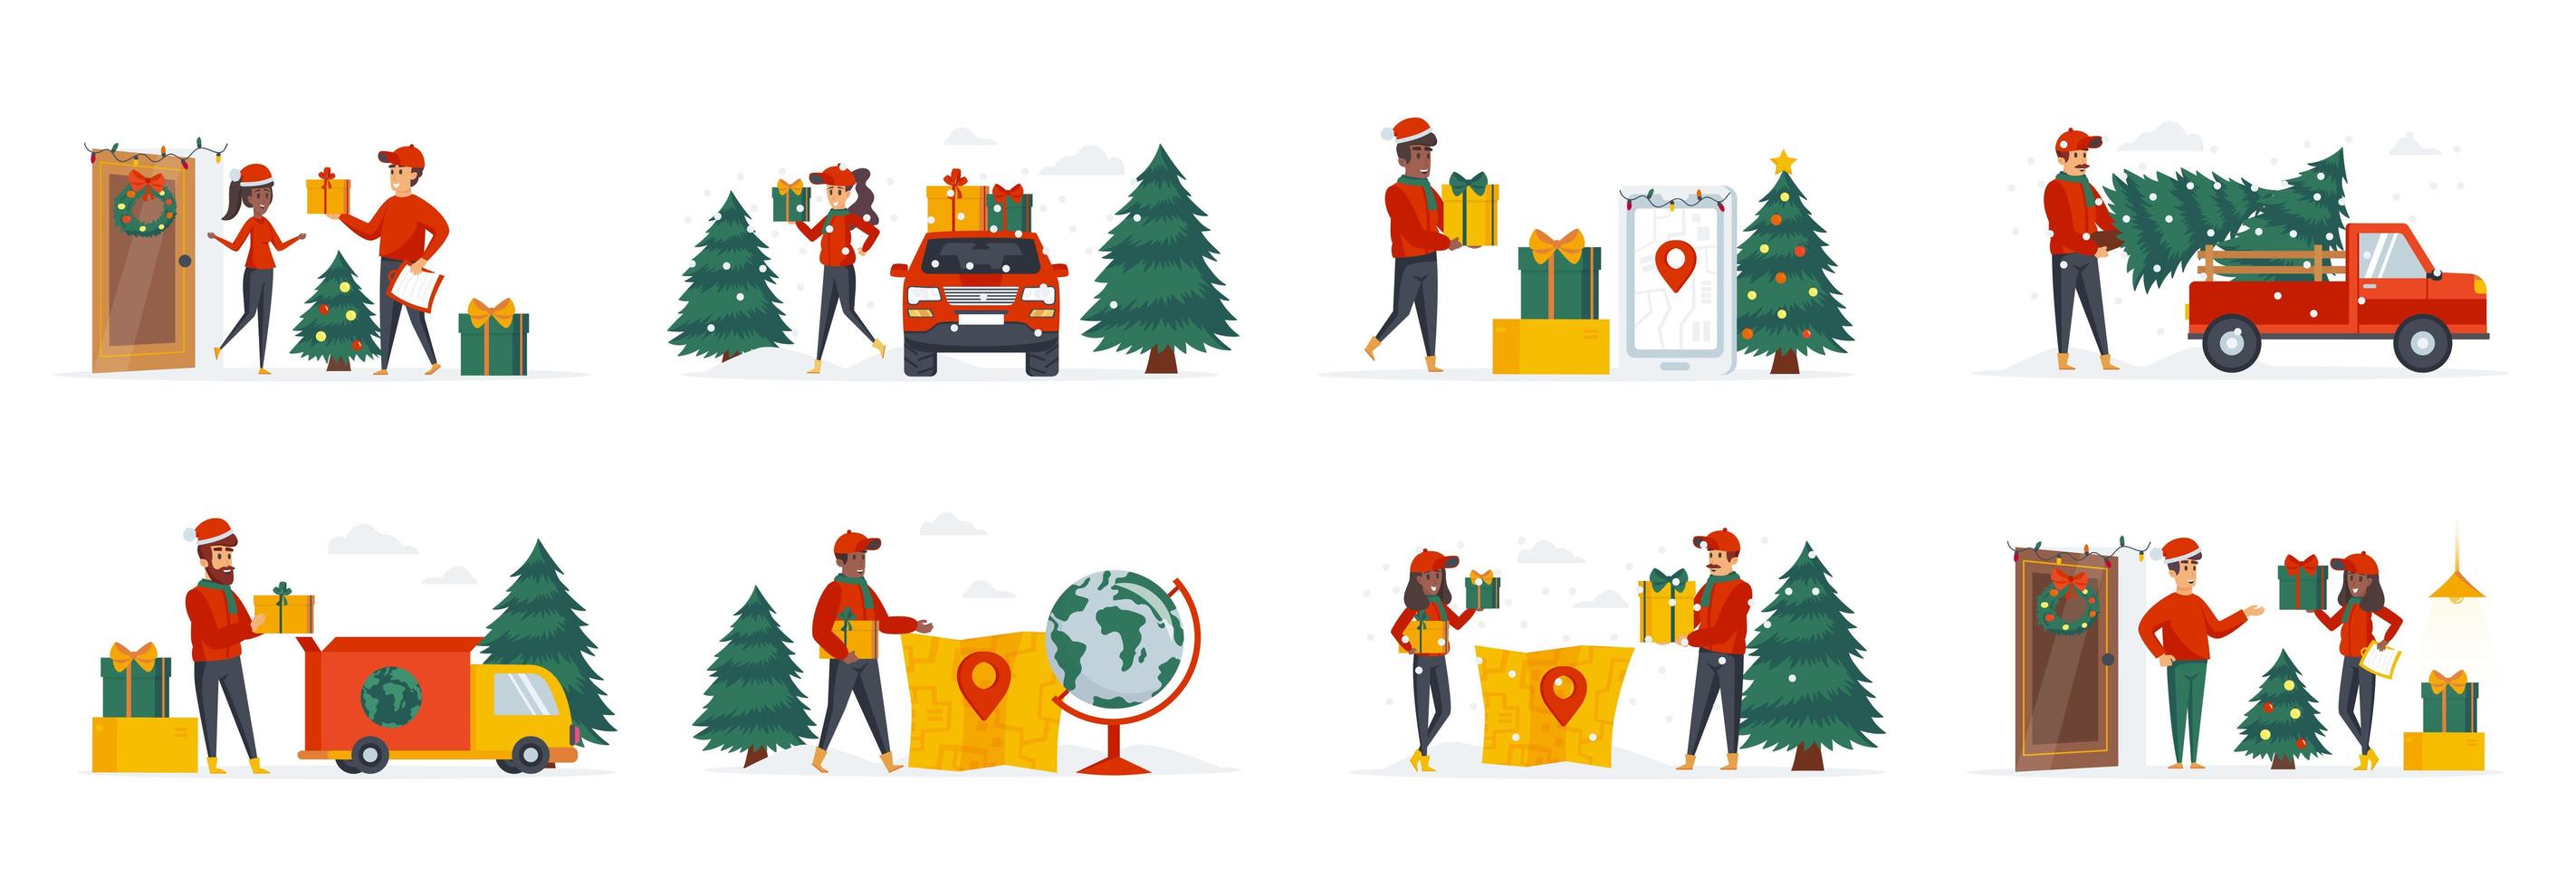 Festive delivery service bundle of scenes with people characters vector